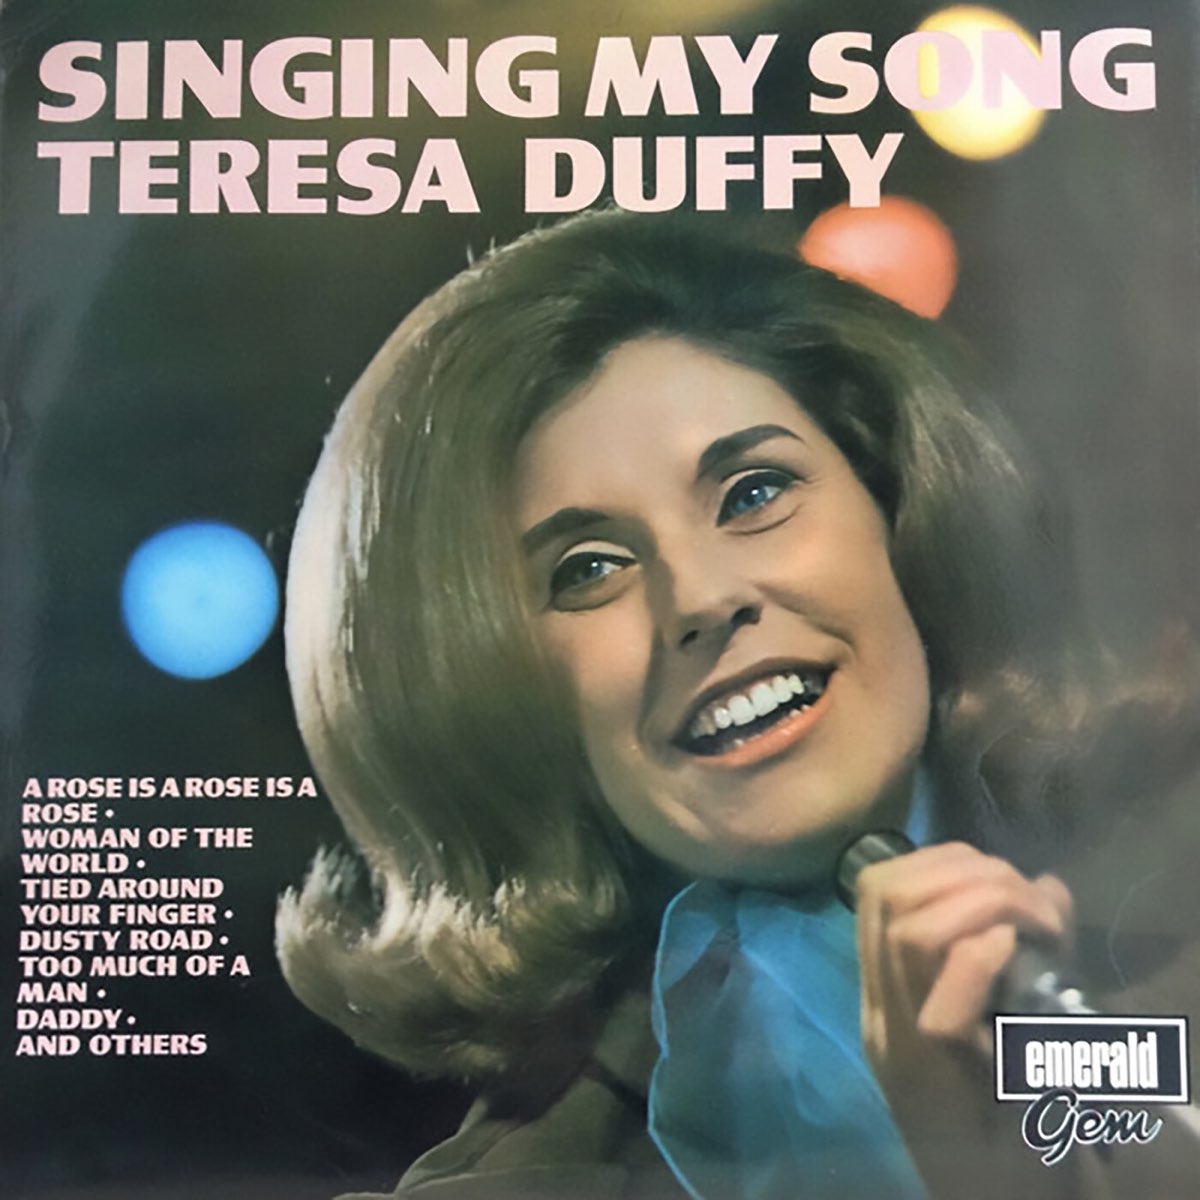 Singing My Song by Teresa Duffy on Apple Music